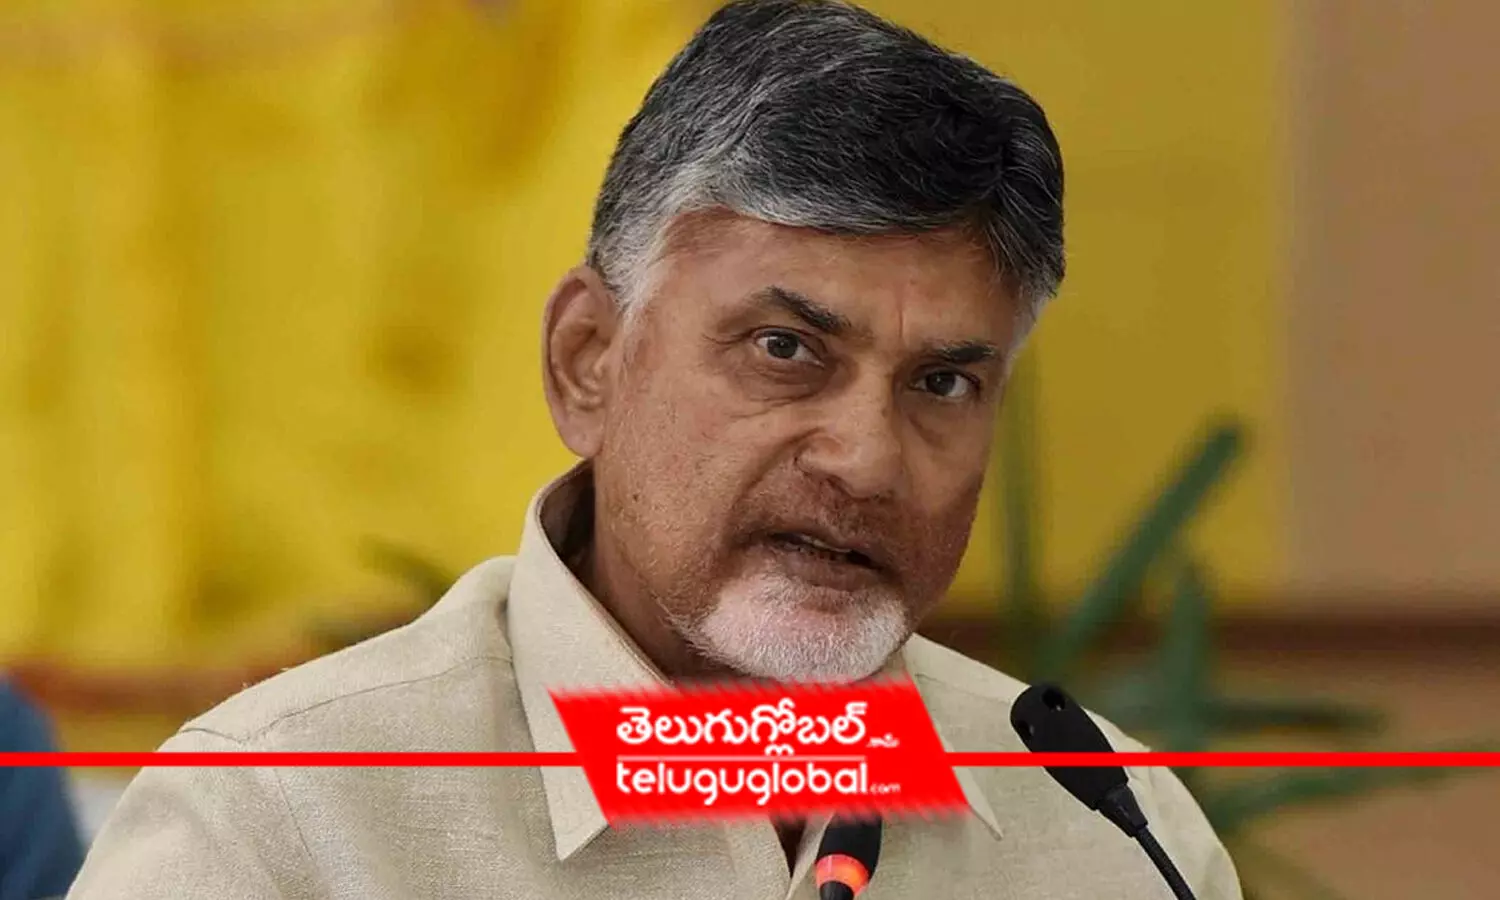 Chandrababu writes Open Letter out of Frustration